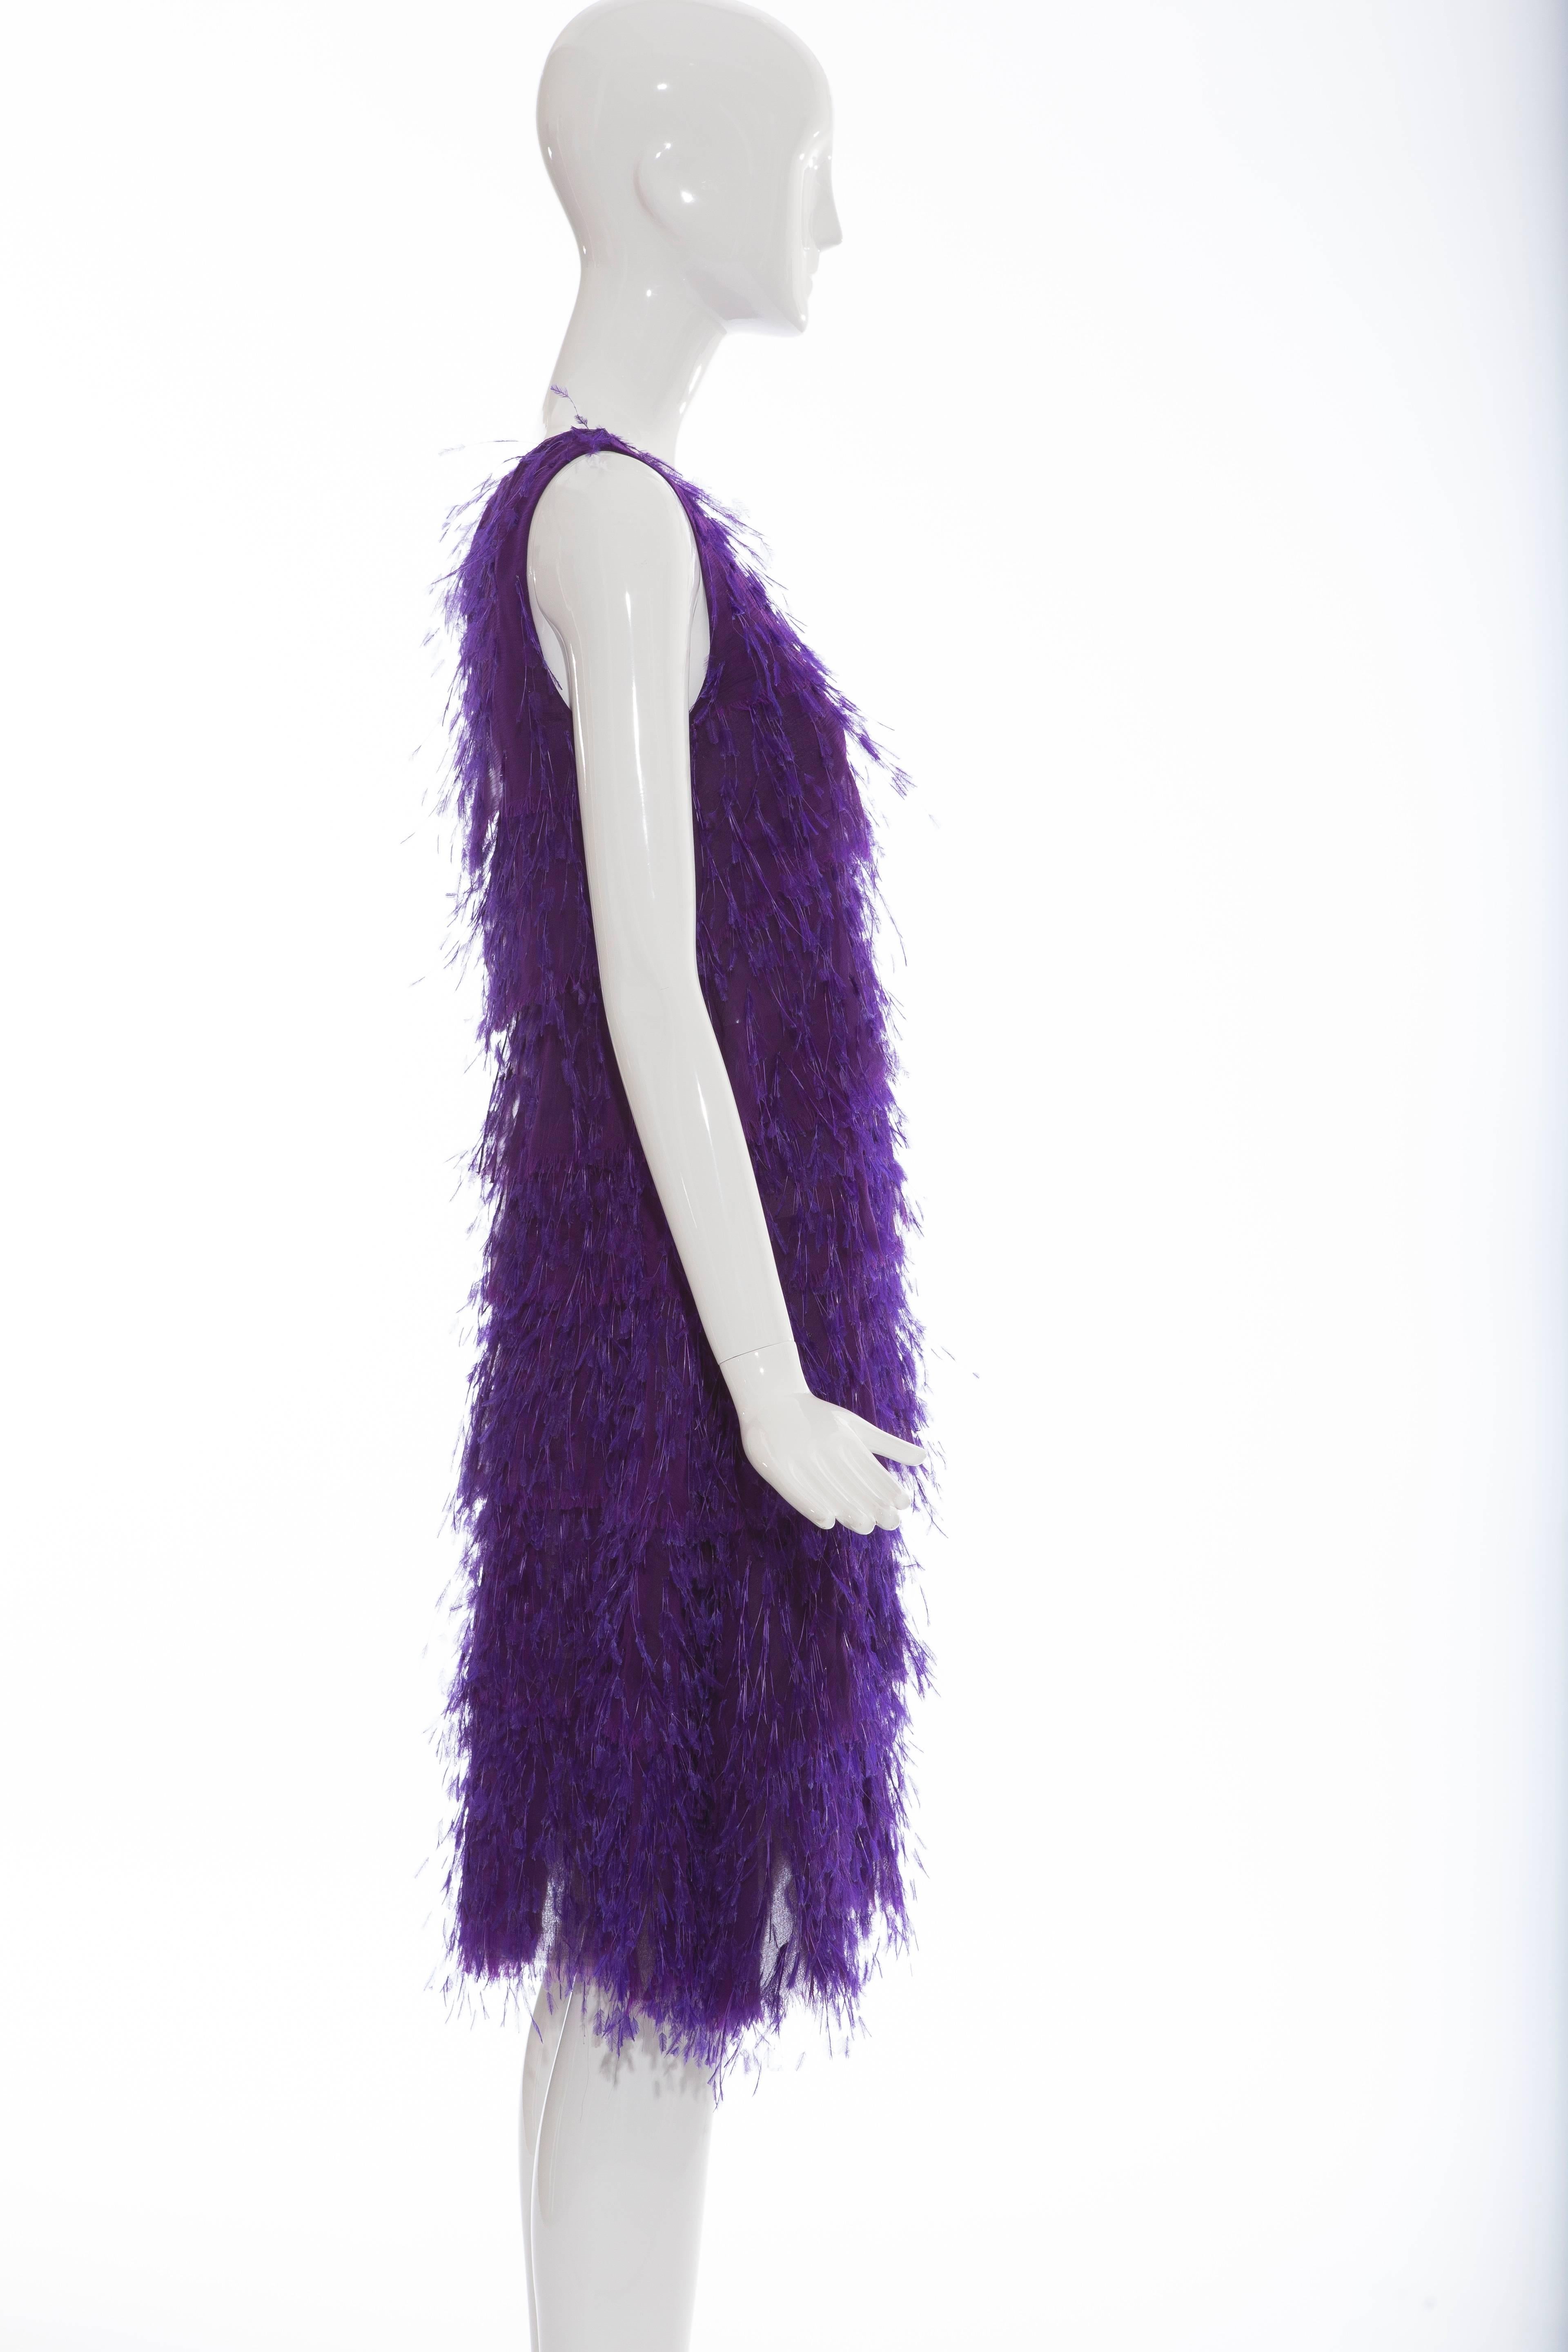 Purple Chado Ralph Rucci Silk Dress With Feather Detail, Fall 2013